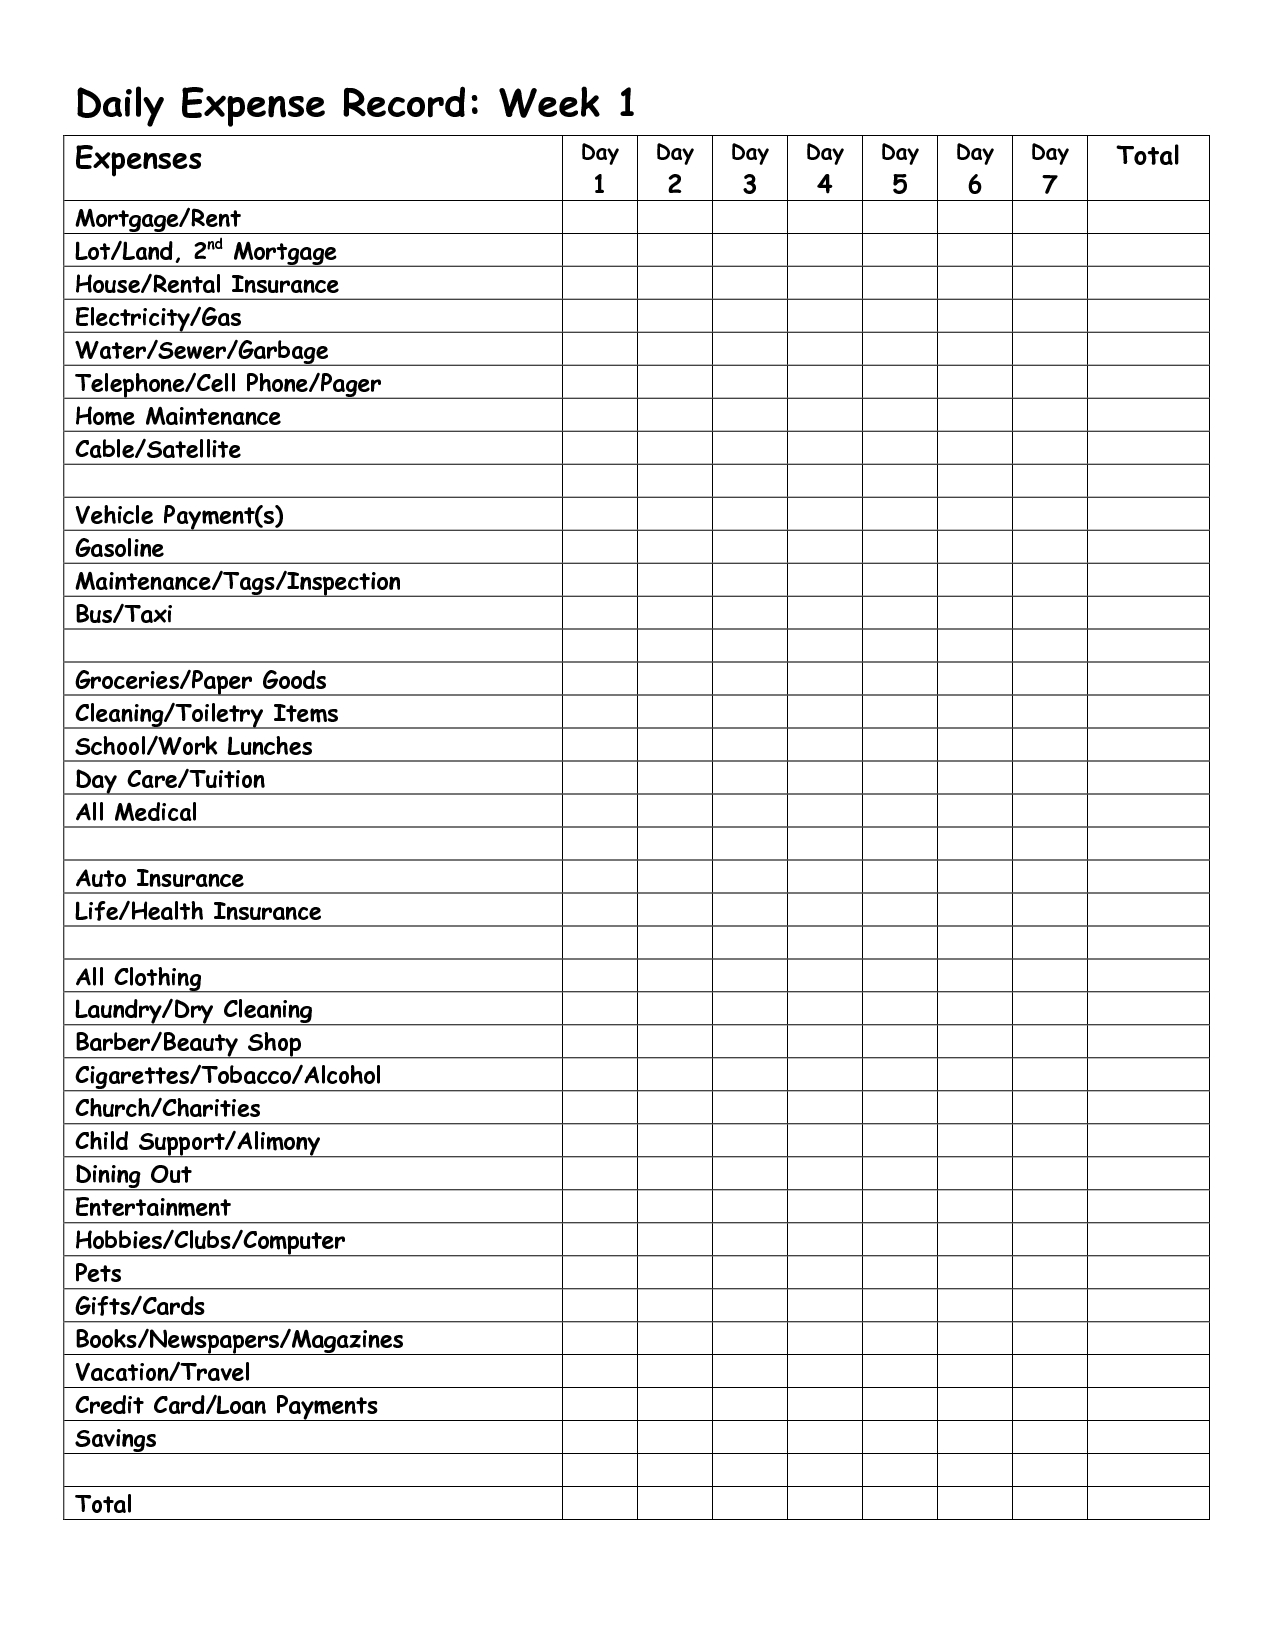 Monthly Expense Report Template | Daily Expense Record Week With Daily Expense Report Template